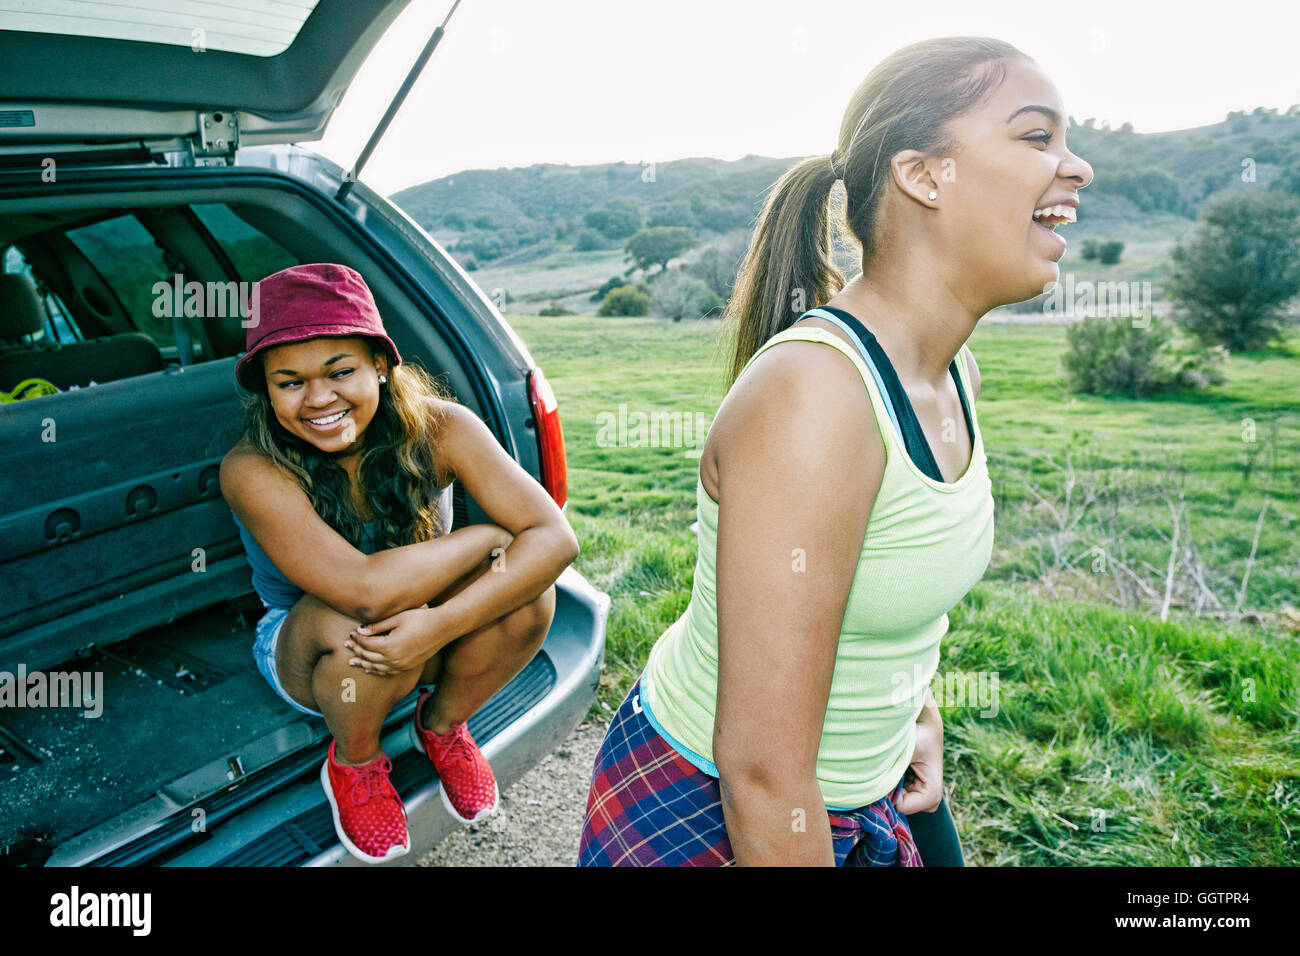 Mixed Race at hatch of car laughing Stock Photo